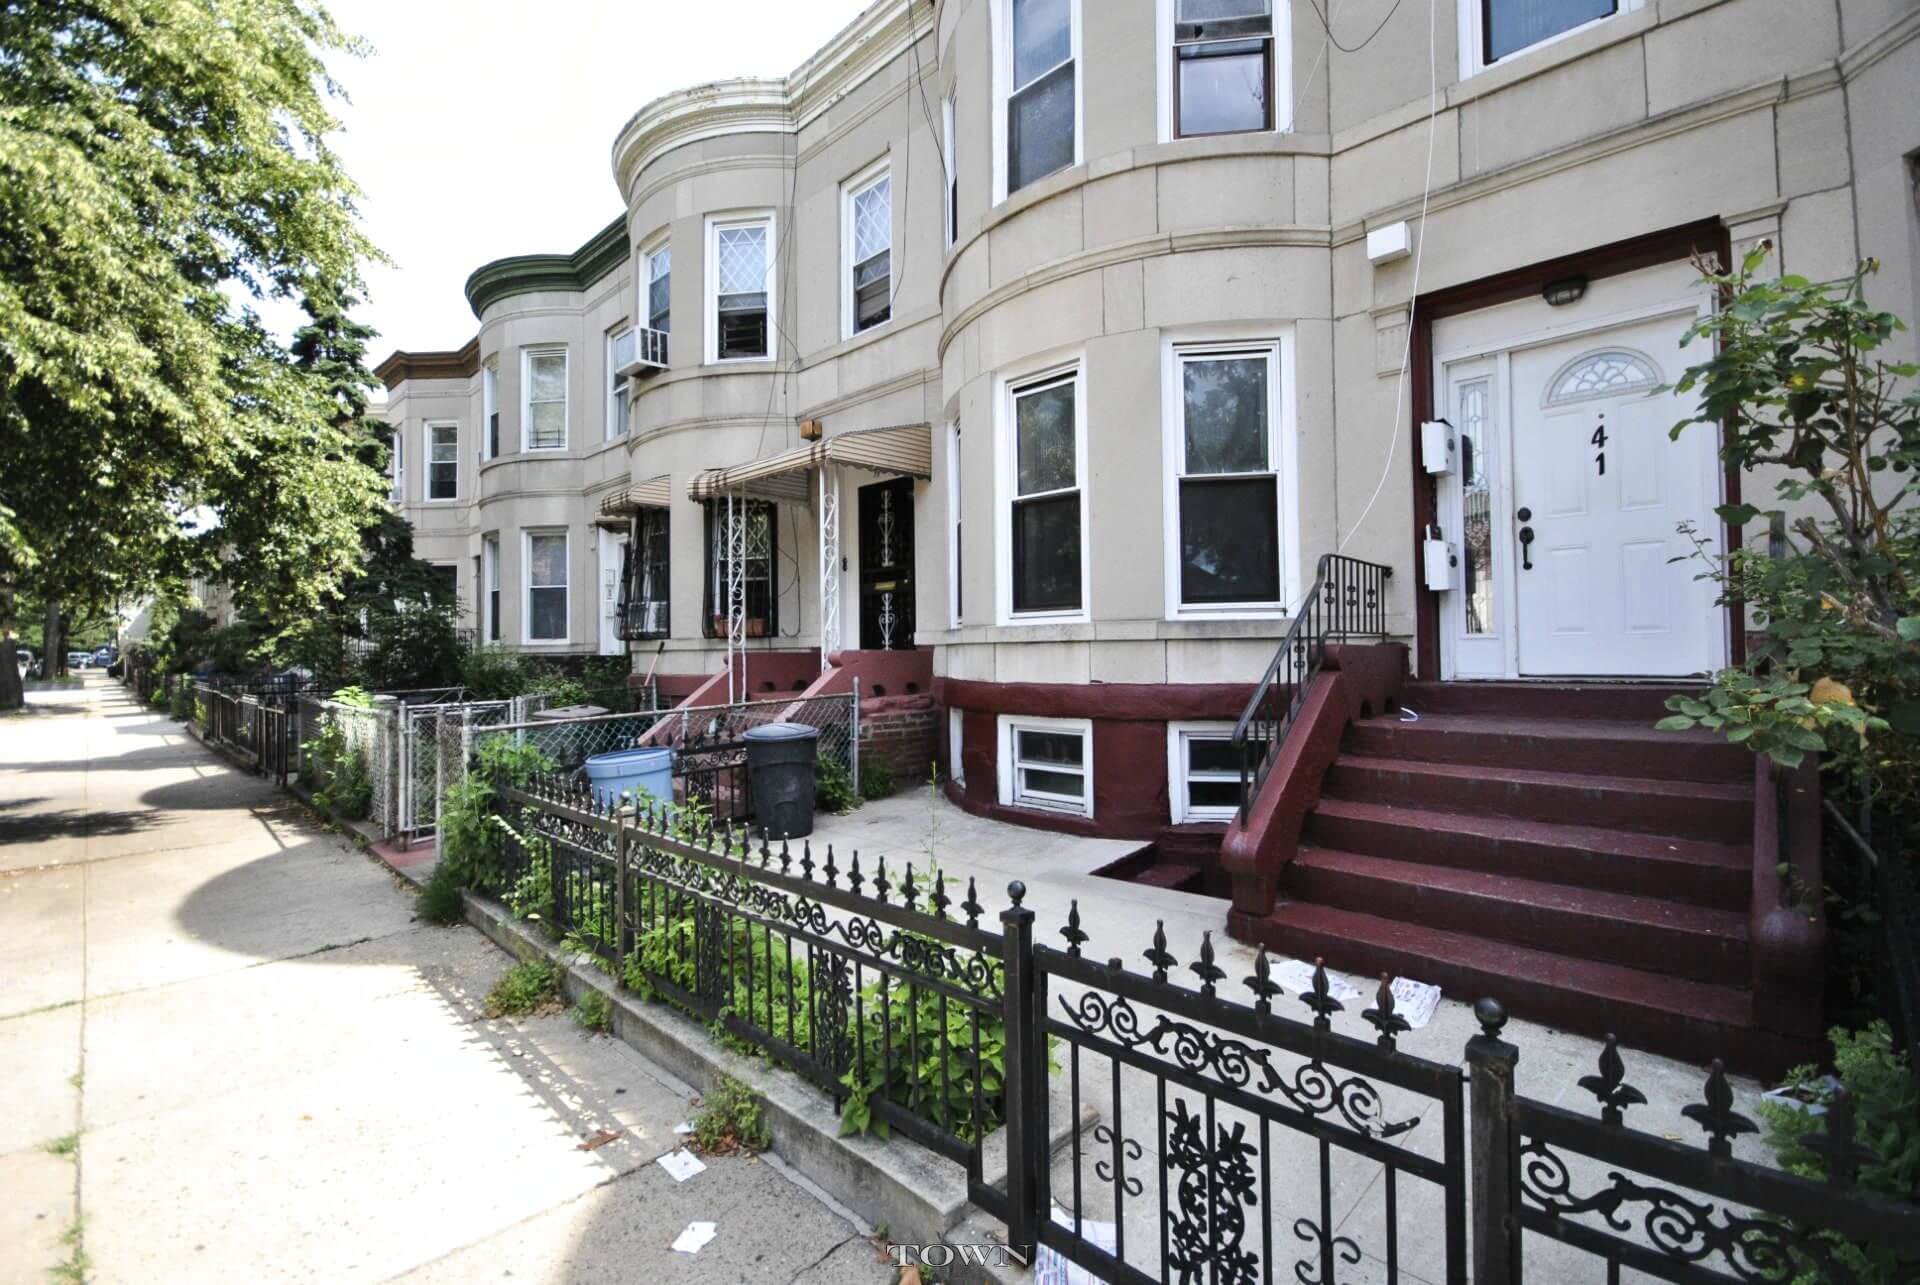 Brooklyn Homes for Sale in Park Slope, Ditmas Park, Ocean Hill